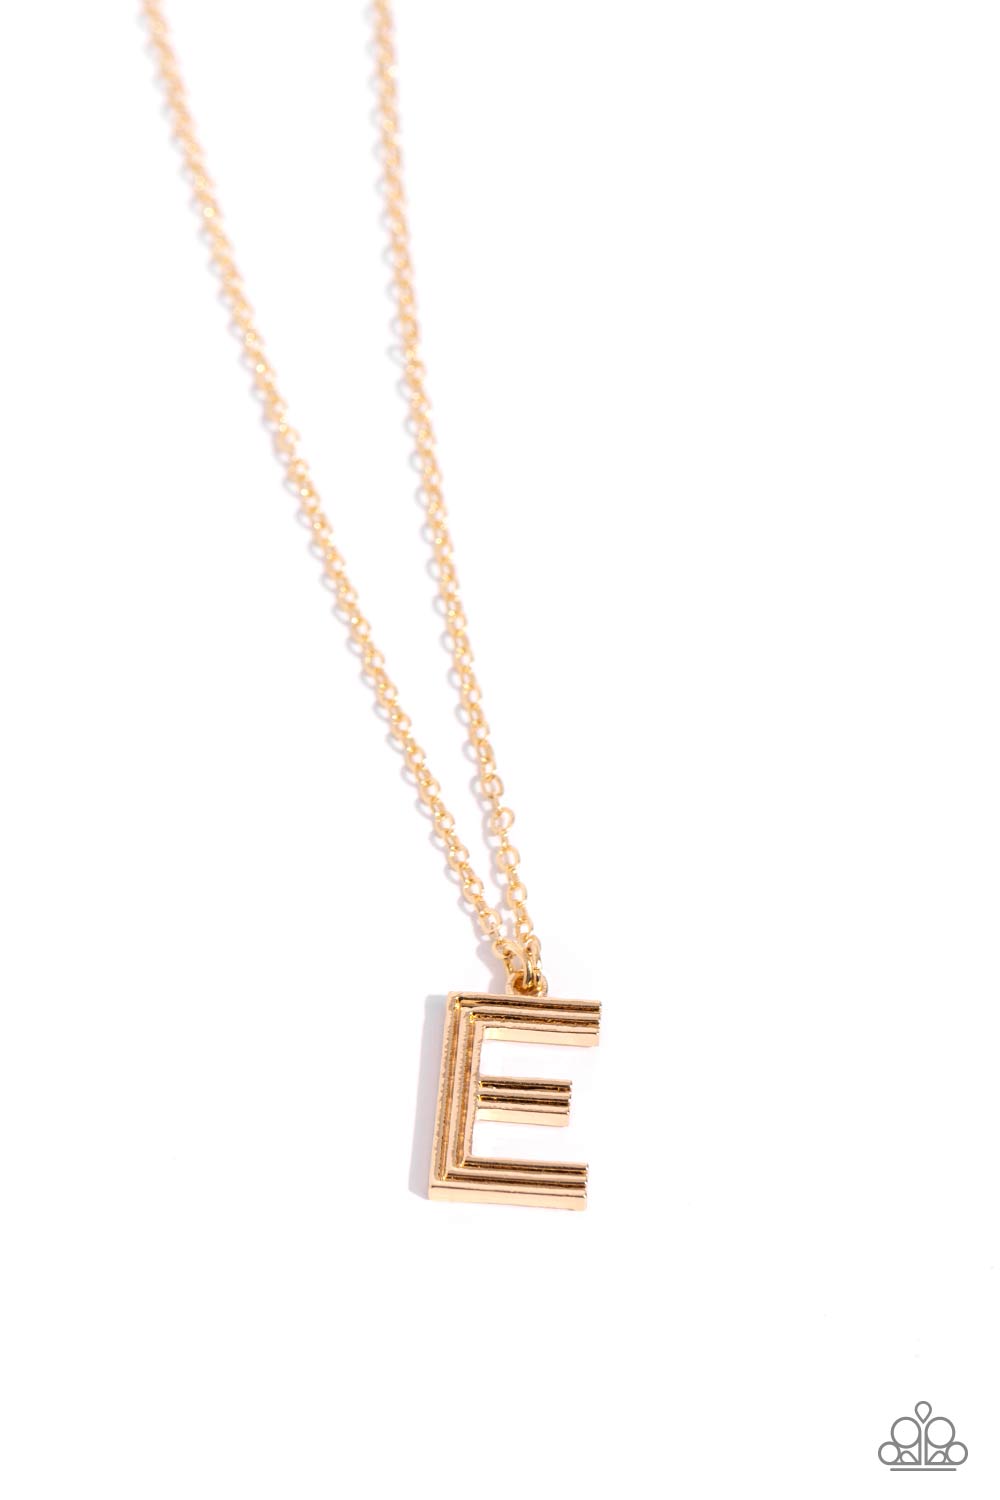 Leave Your Initials Paparazzi Accessories Necklace with Earrings Gold - E